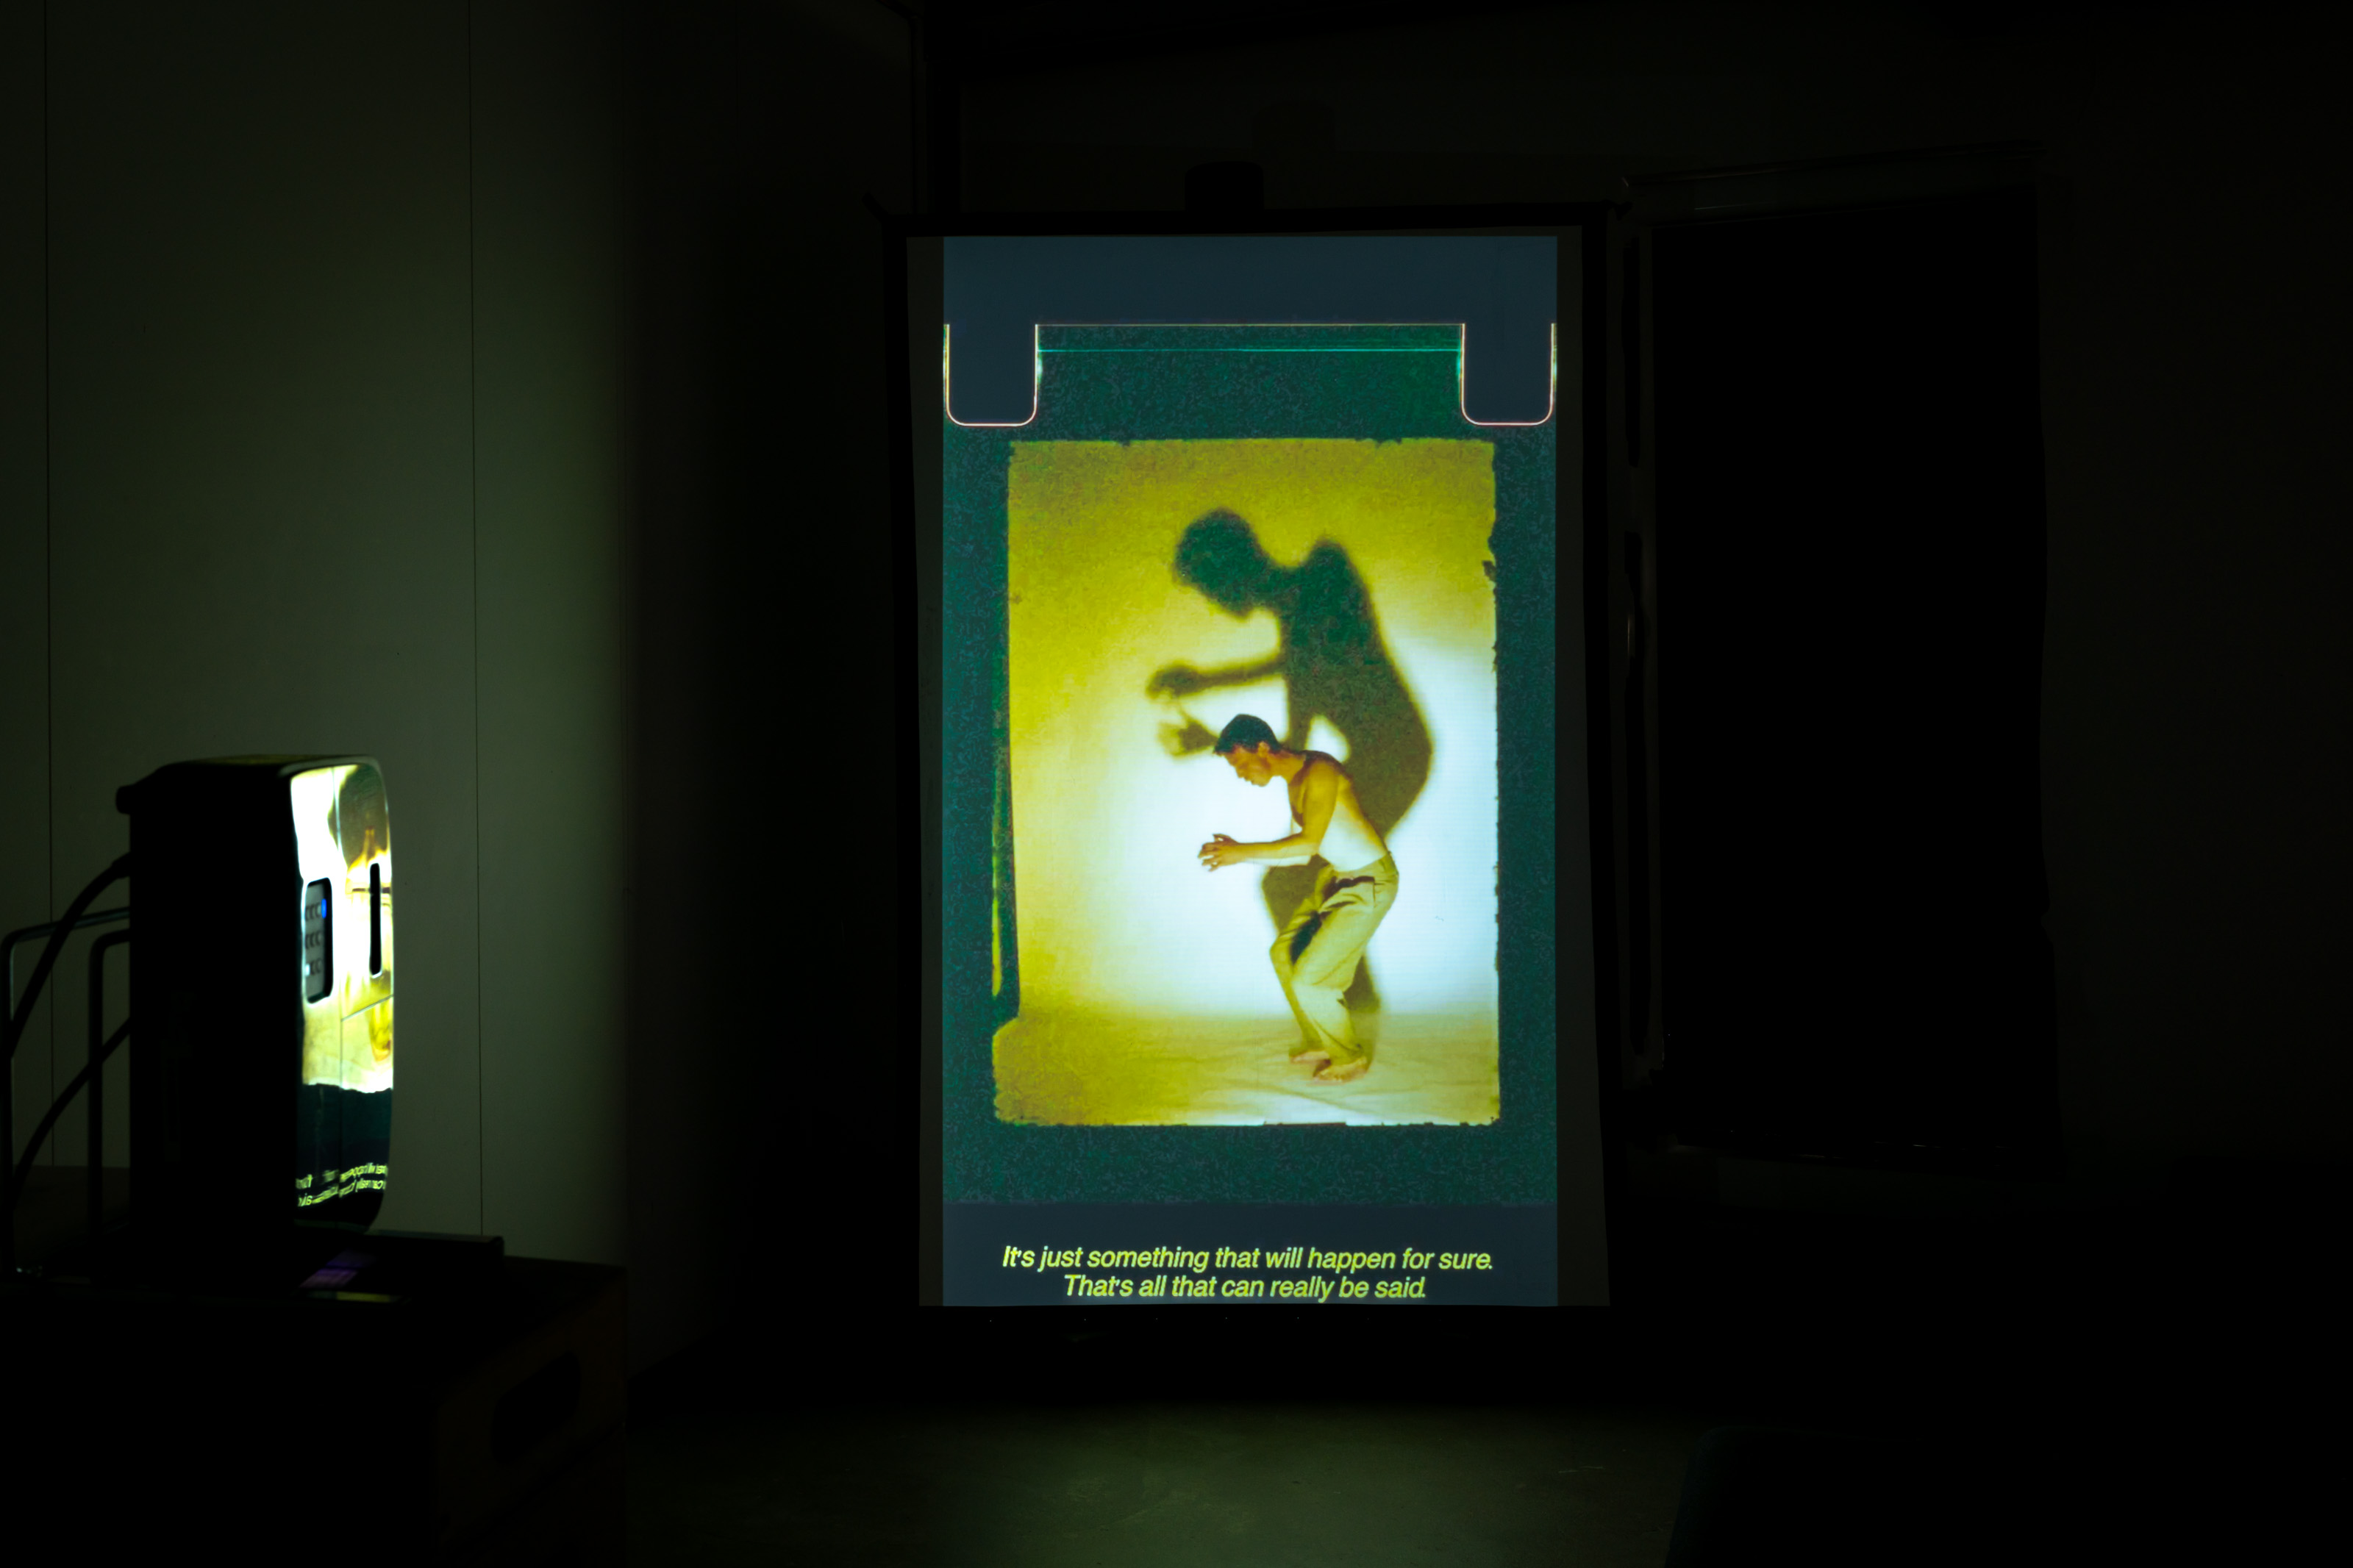 A film projection showing a man dancing with a looming shadow on the wall behind him